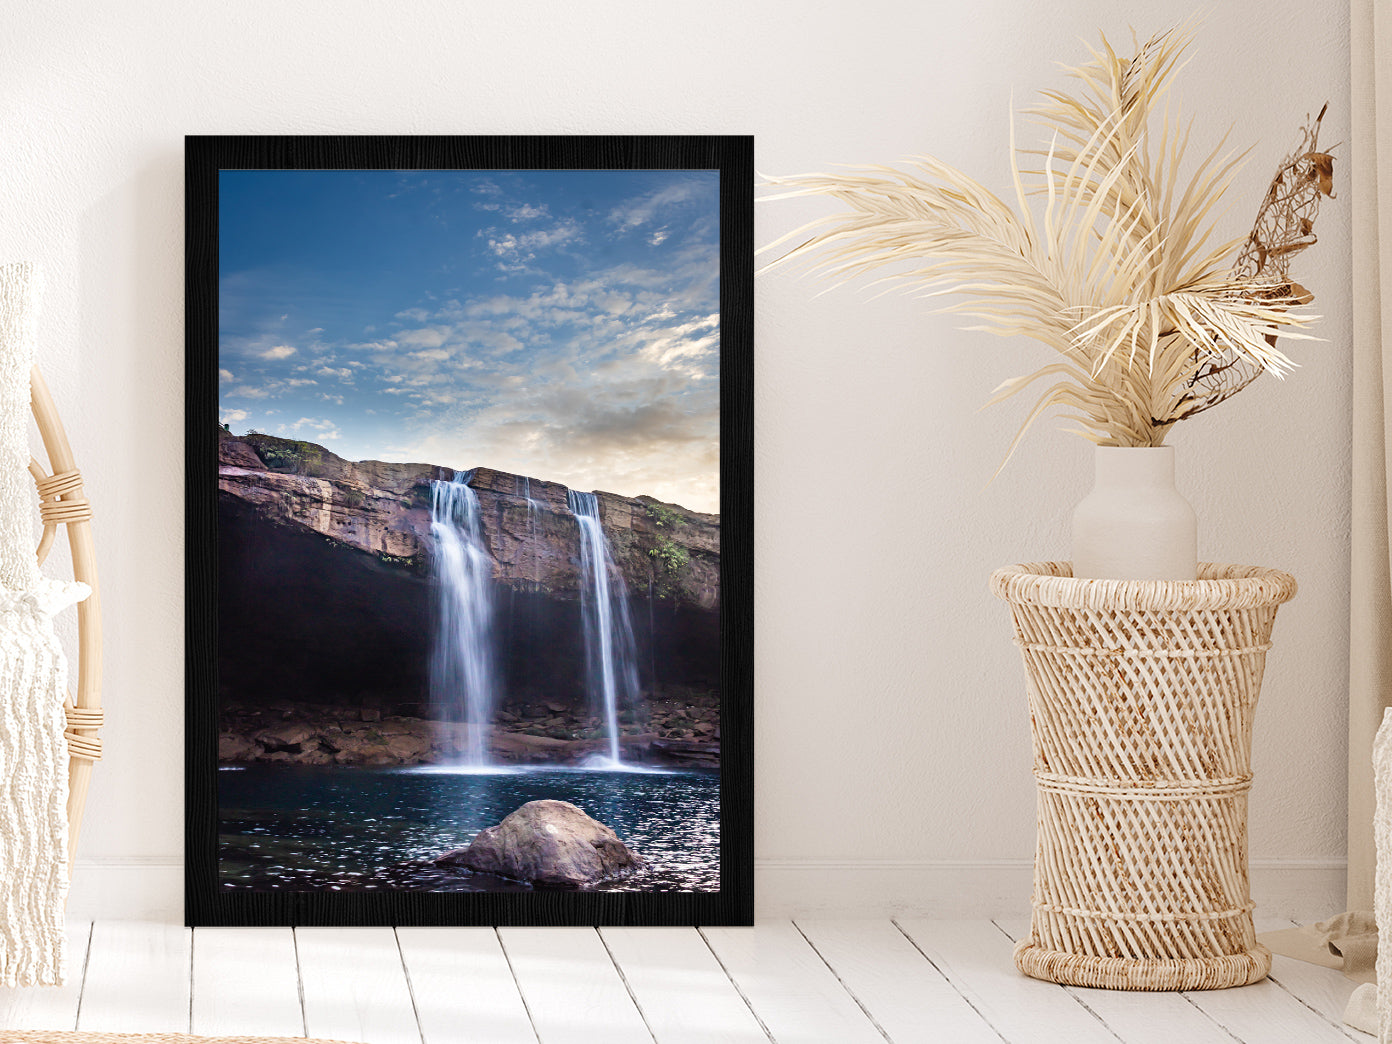 Waterfall Falling From Mountain Glass Framed Wall Art, Ready to Hang Quality Print Without White Border Black